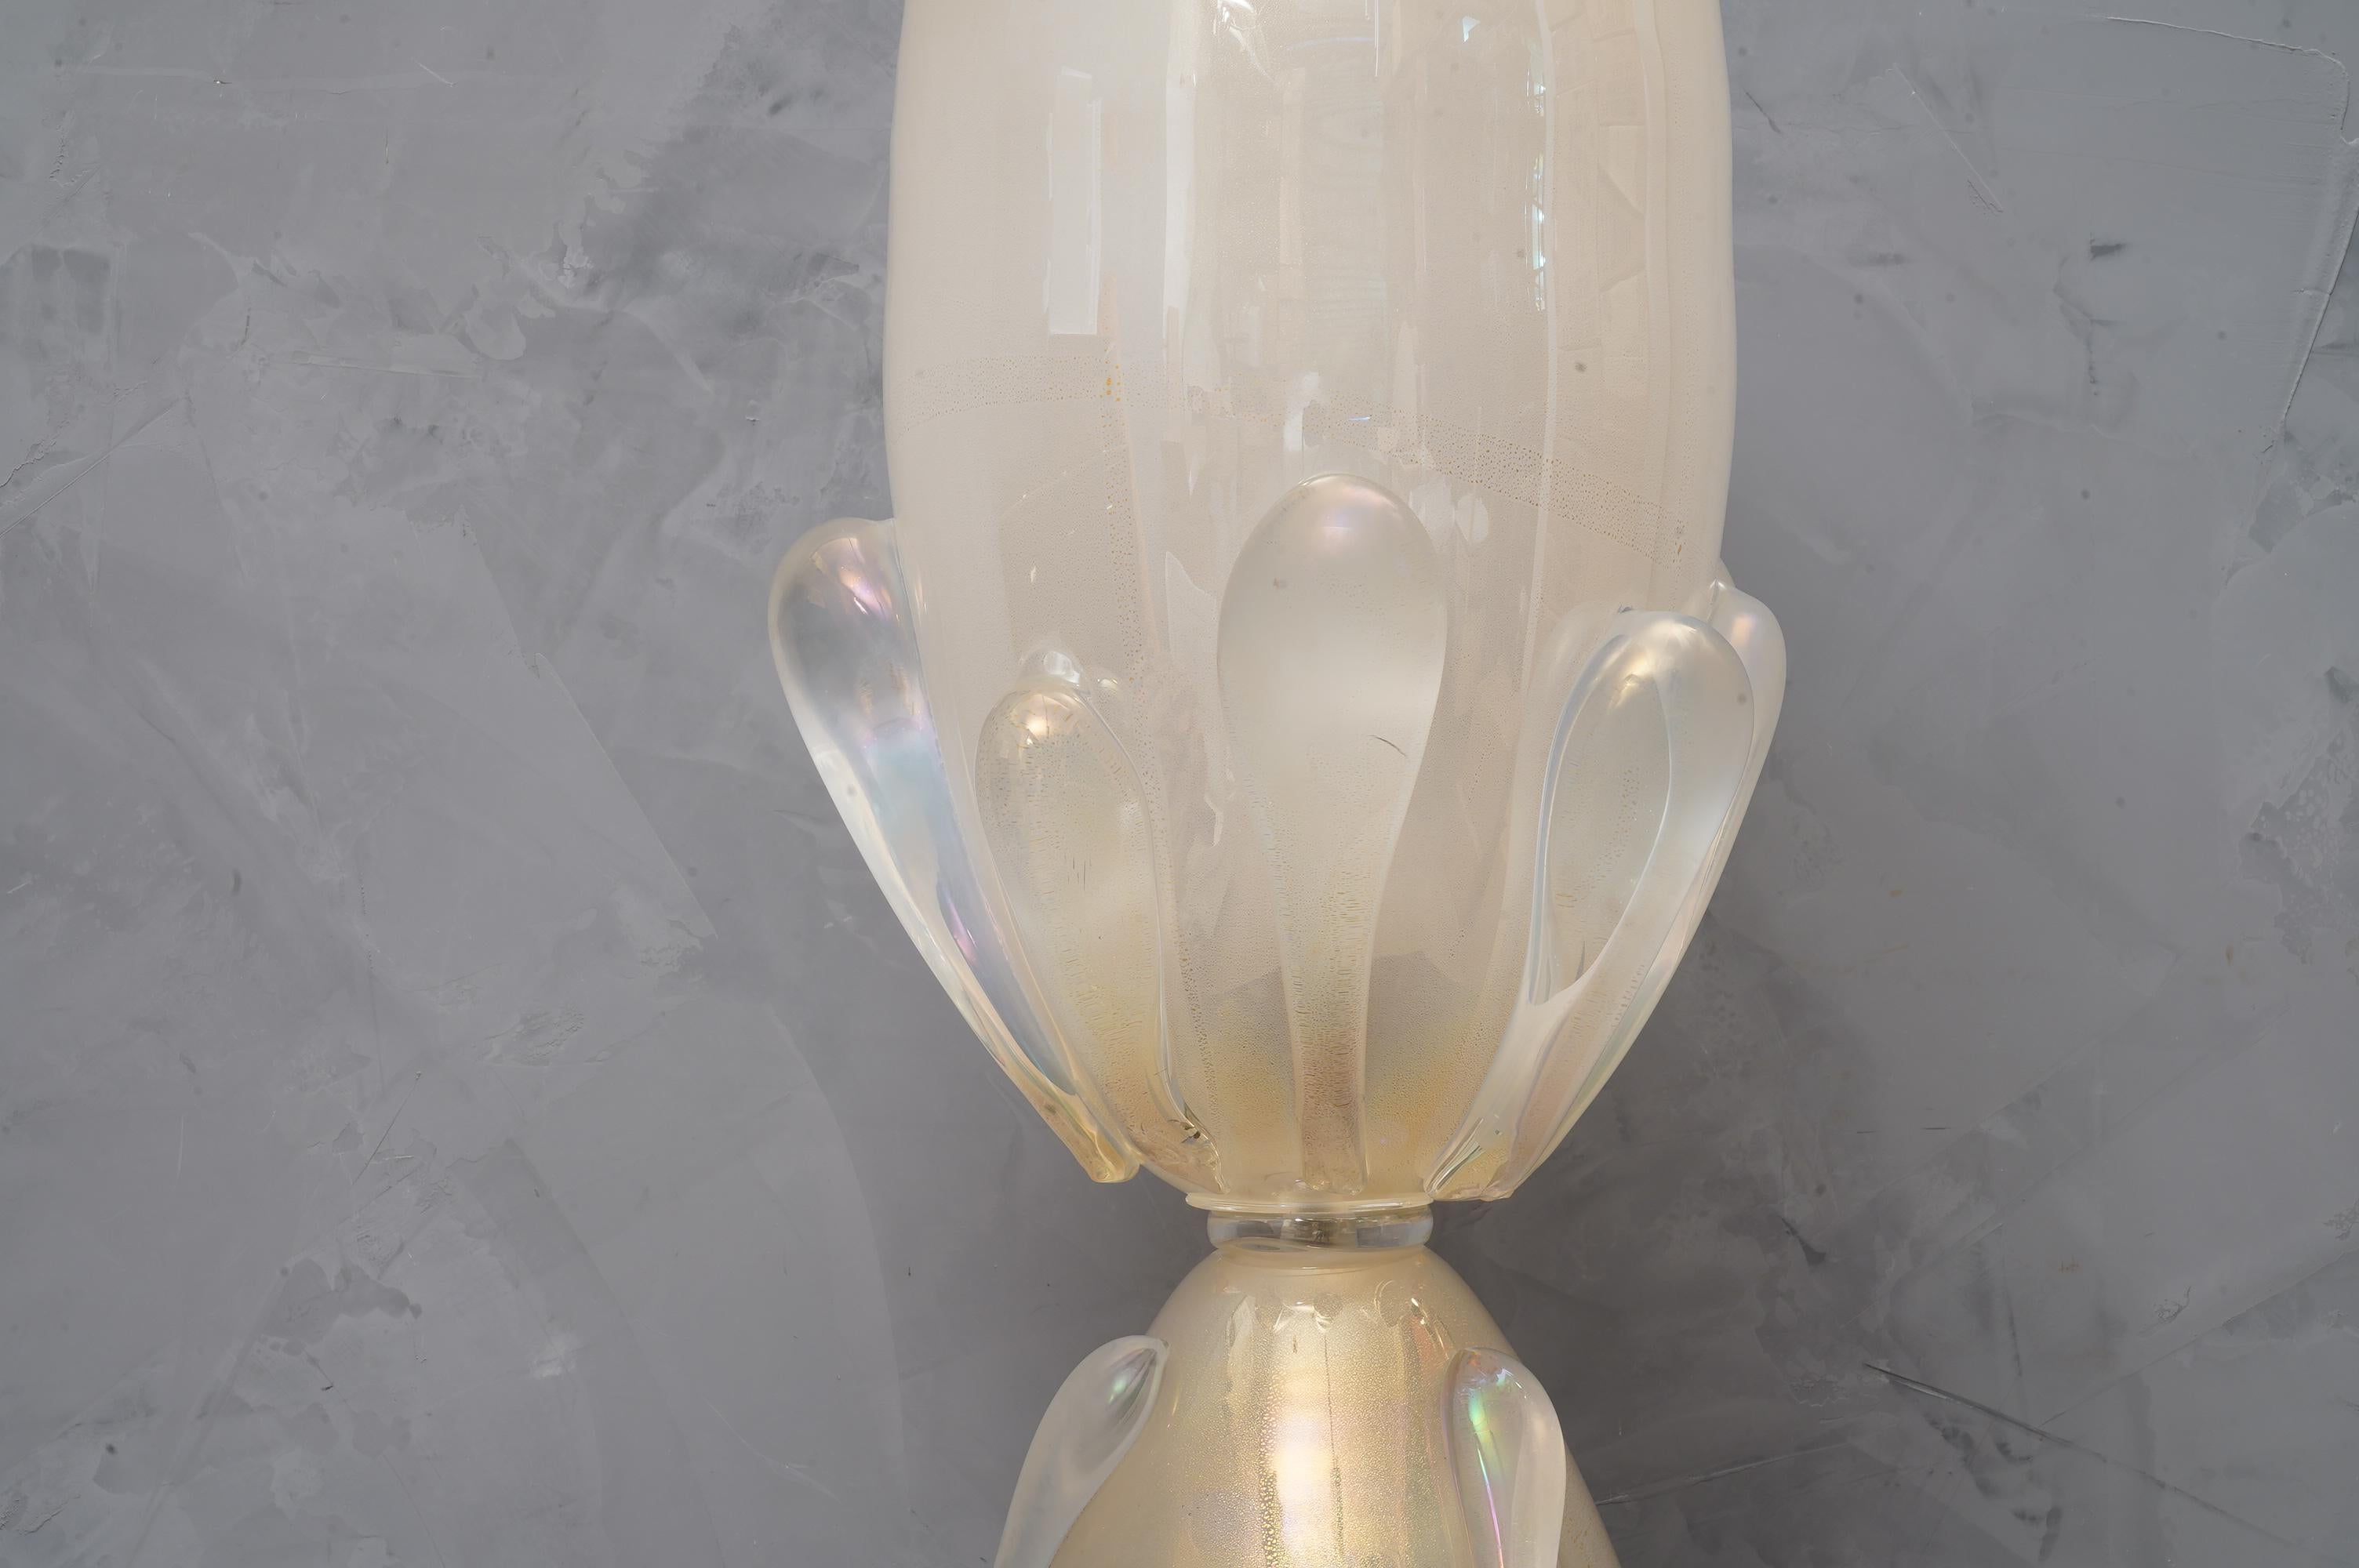 Splendid Barovier & Toso table lamps in acid and iridescent Murano glass. Very beautiful drops coming down the lamp. A supreme iridescent color.

The table lamps are composed of a large upper cup, on which differently shaped glass drops are applied